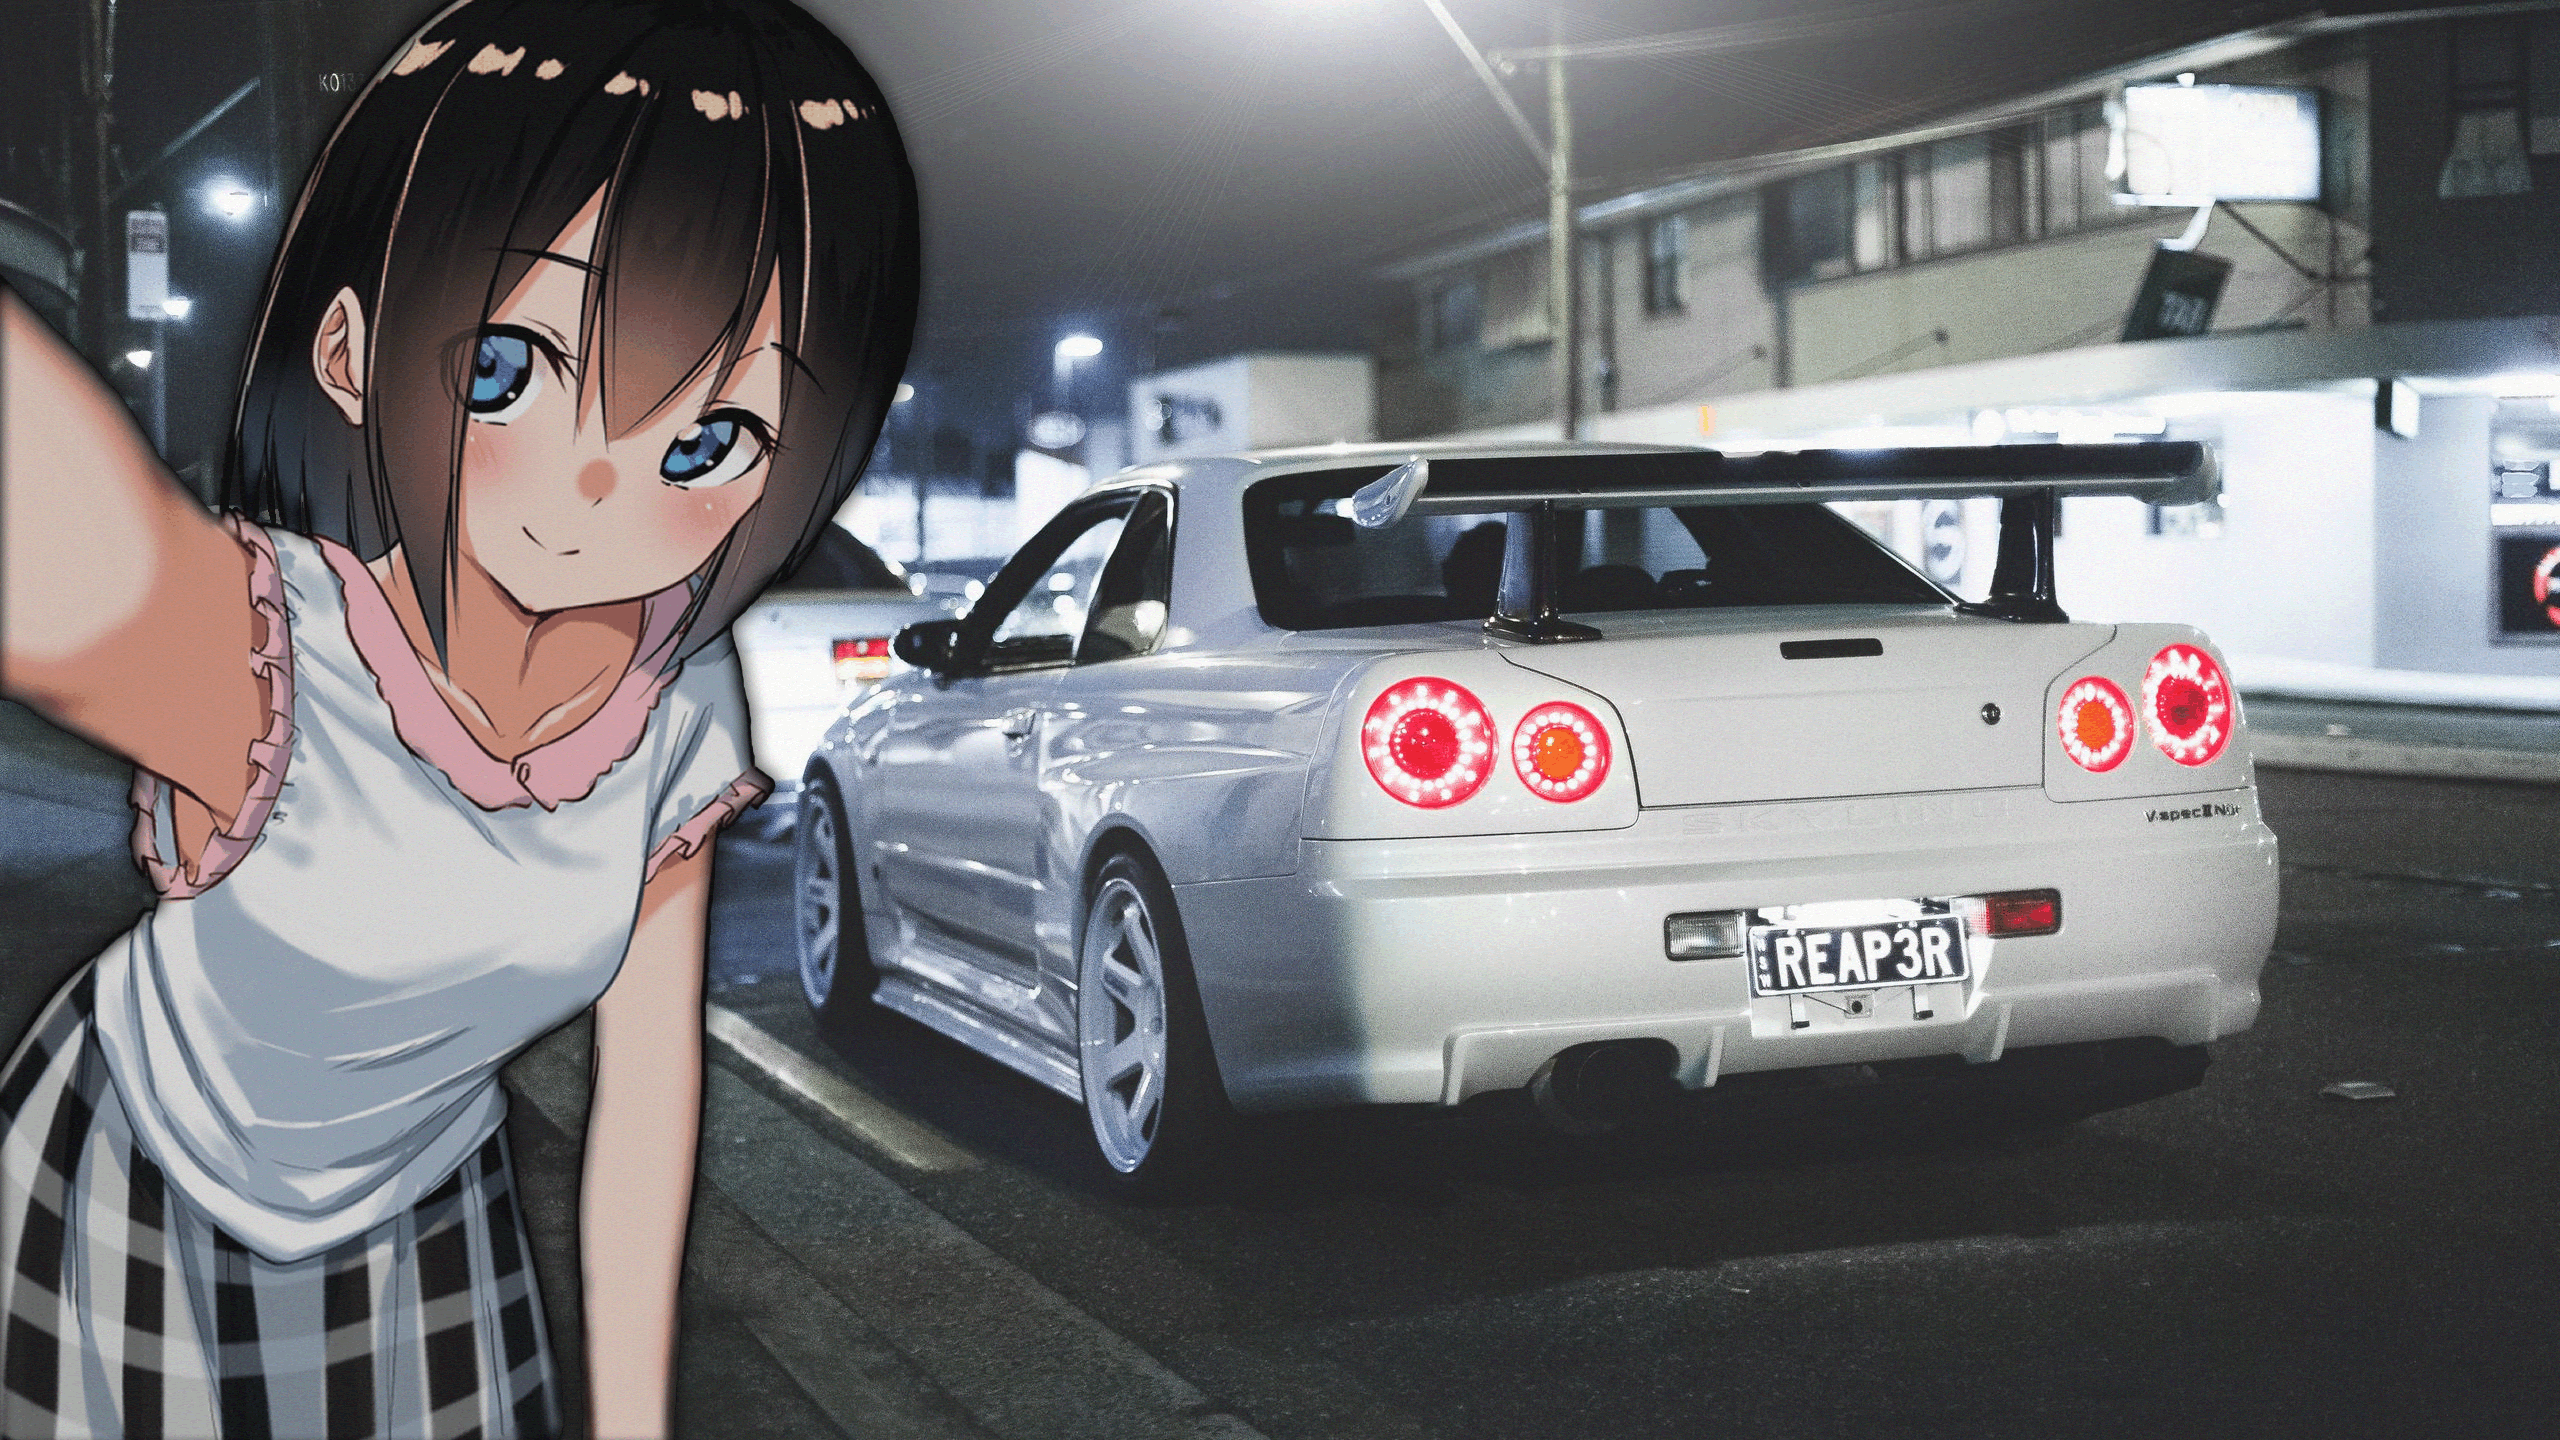 Anime 2560x1440 Japanese cars anime girls selfies car picture-in-picture vehicle anime blue eyes brunette white cars smiling animeirl